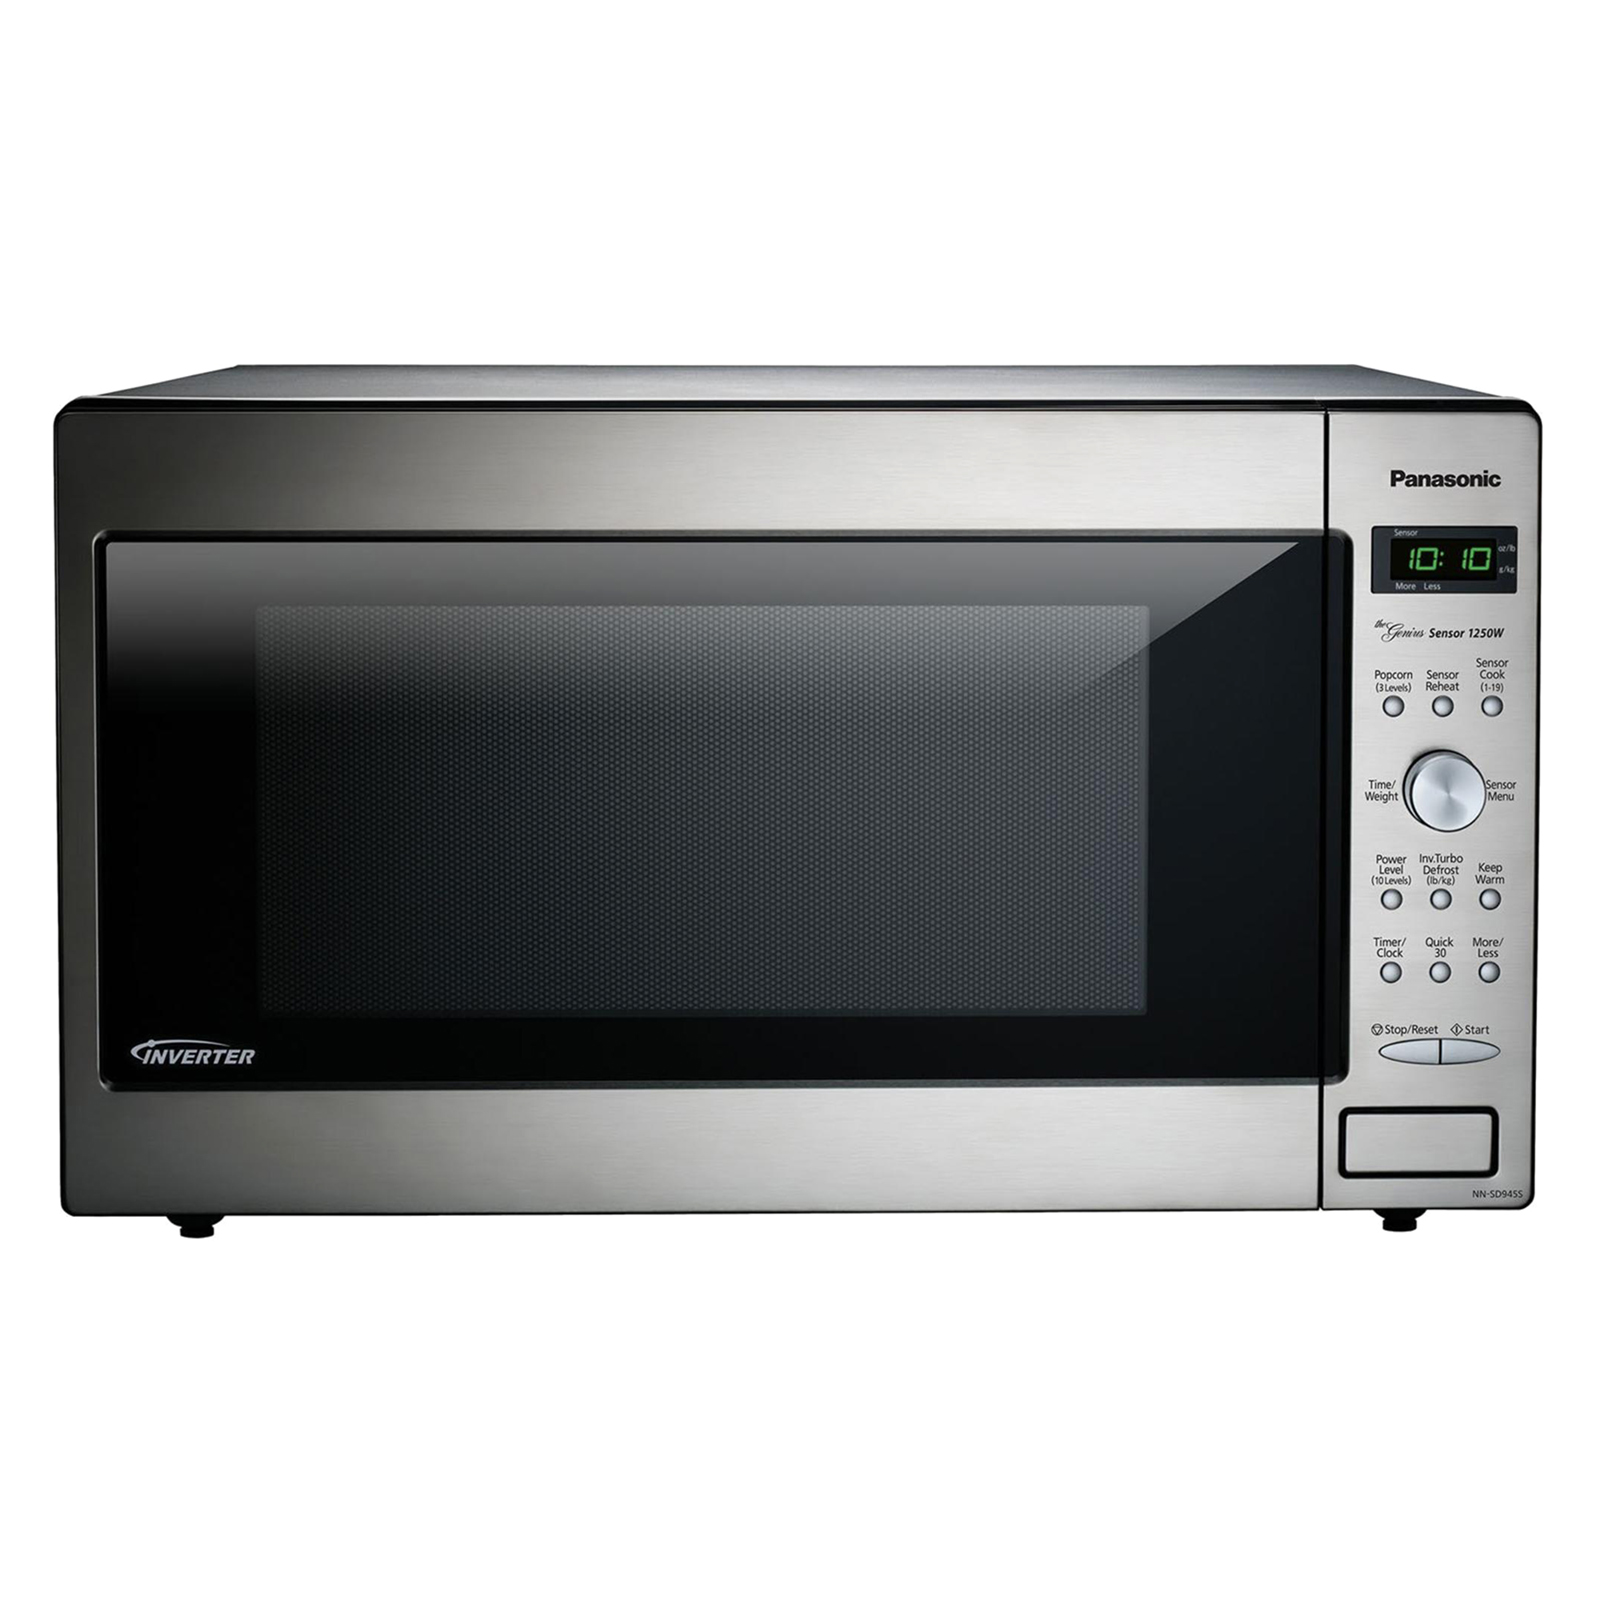 Panasonic NN-SD945S 2.2cu.ft. 1250W Countertop Microwave with Sensor Cook - Stainless Steel